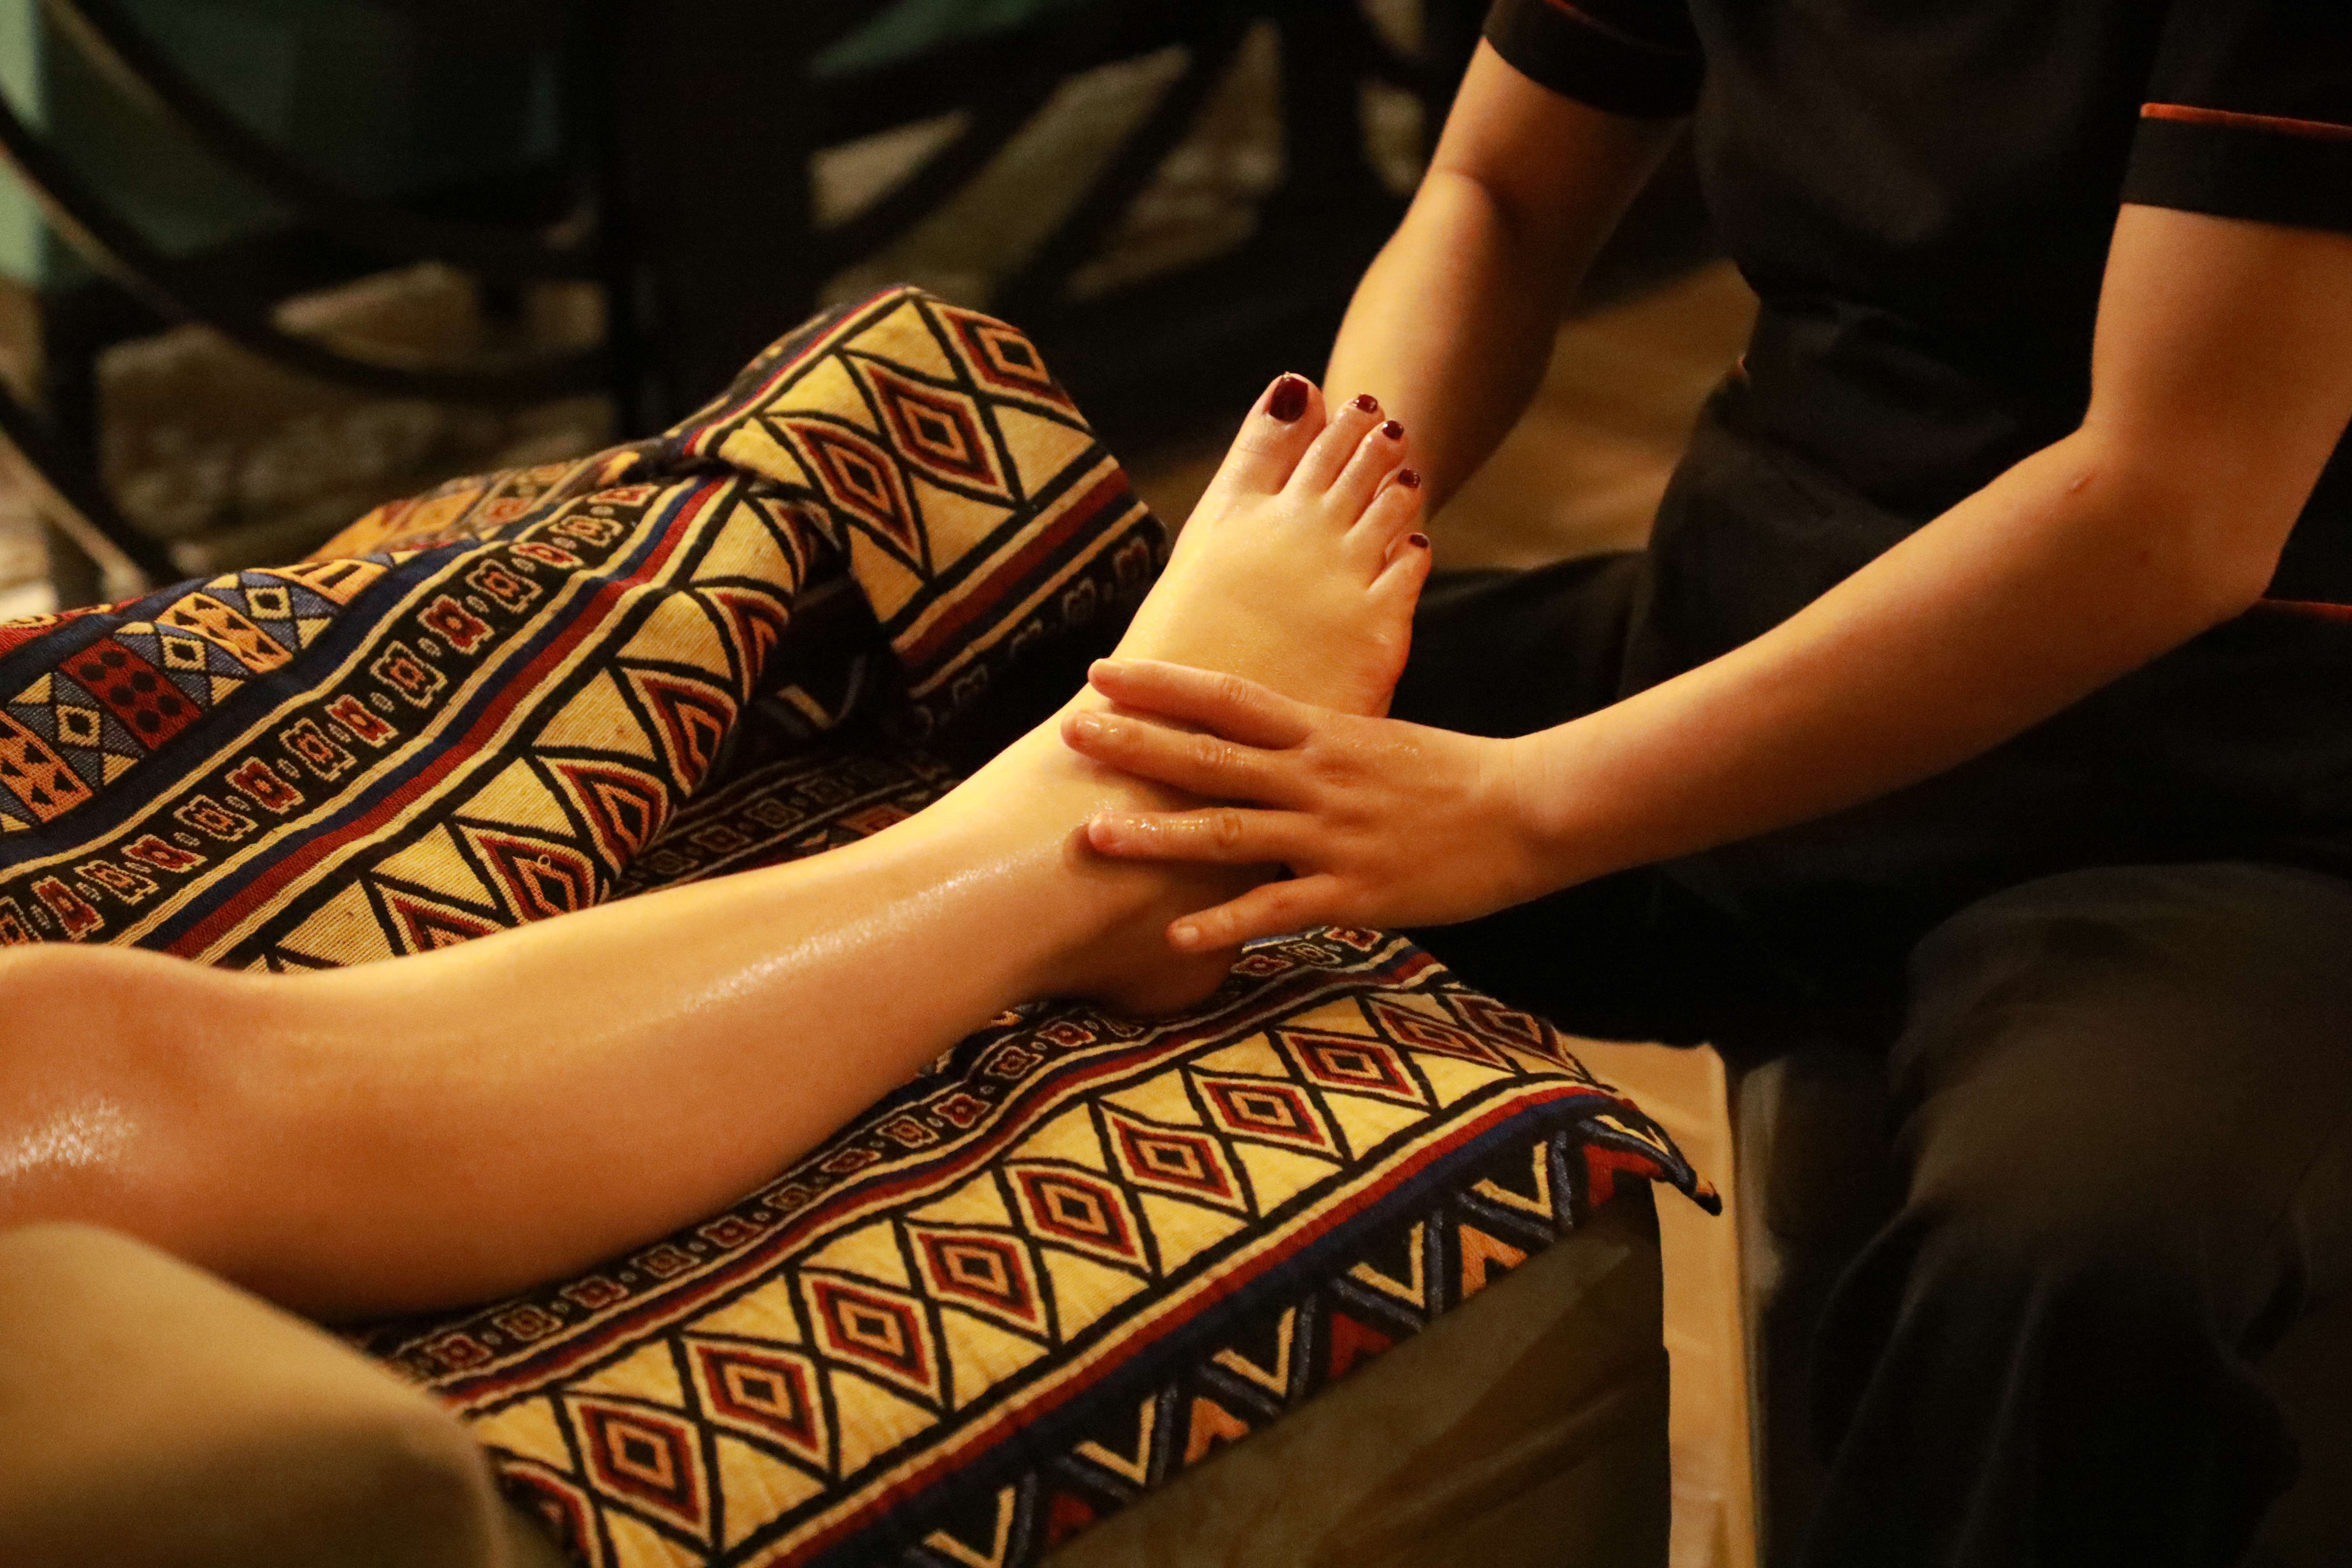 Top 5 foot massage places to try in Sapa.